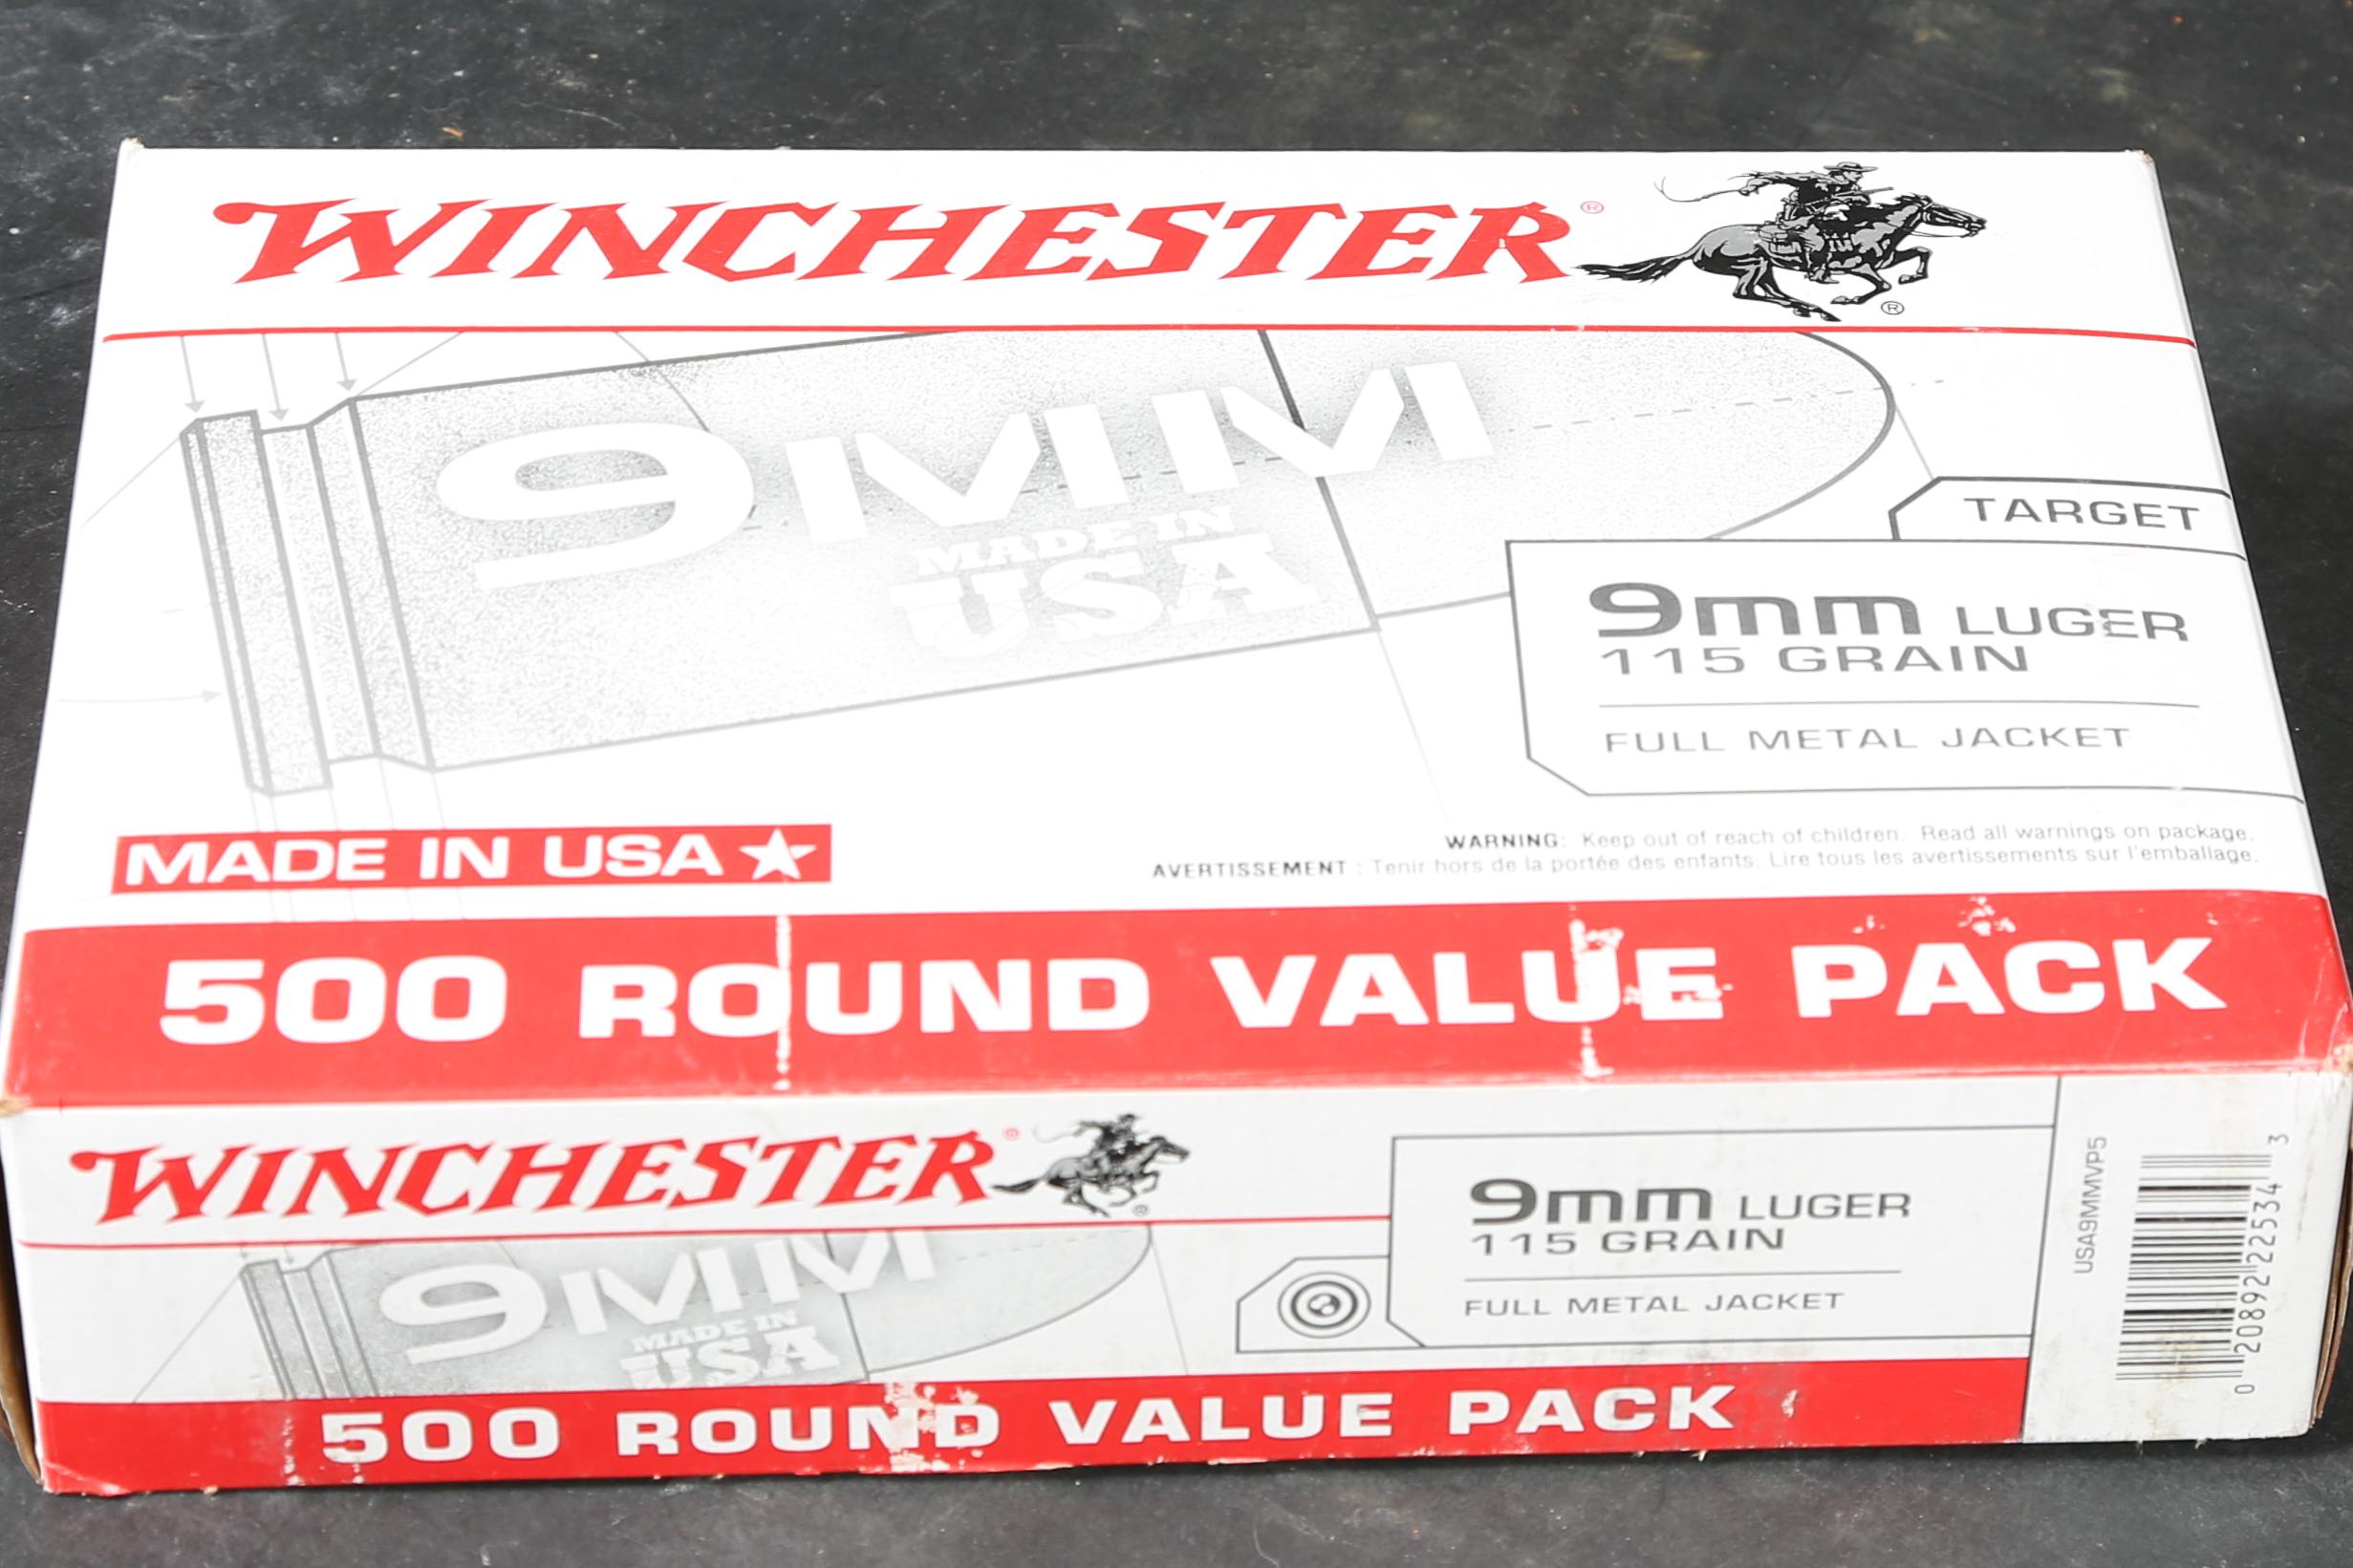 Case of Winchester 9mm Ammo